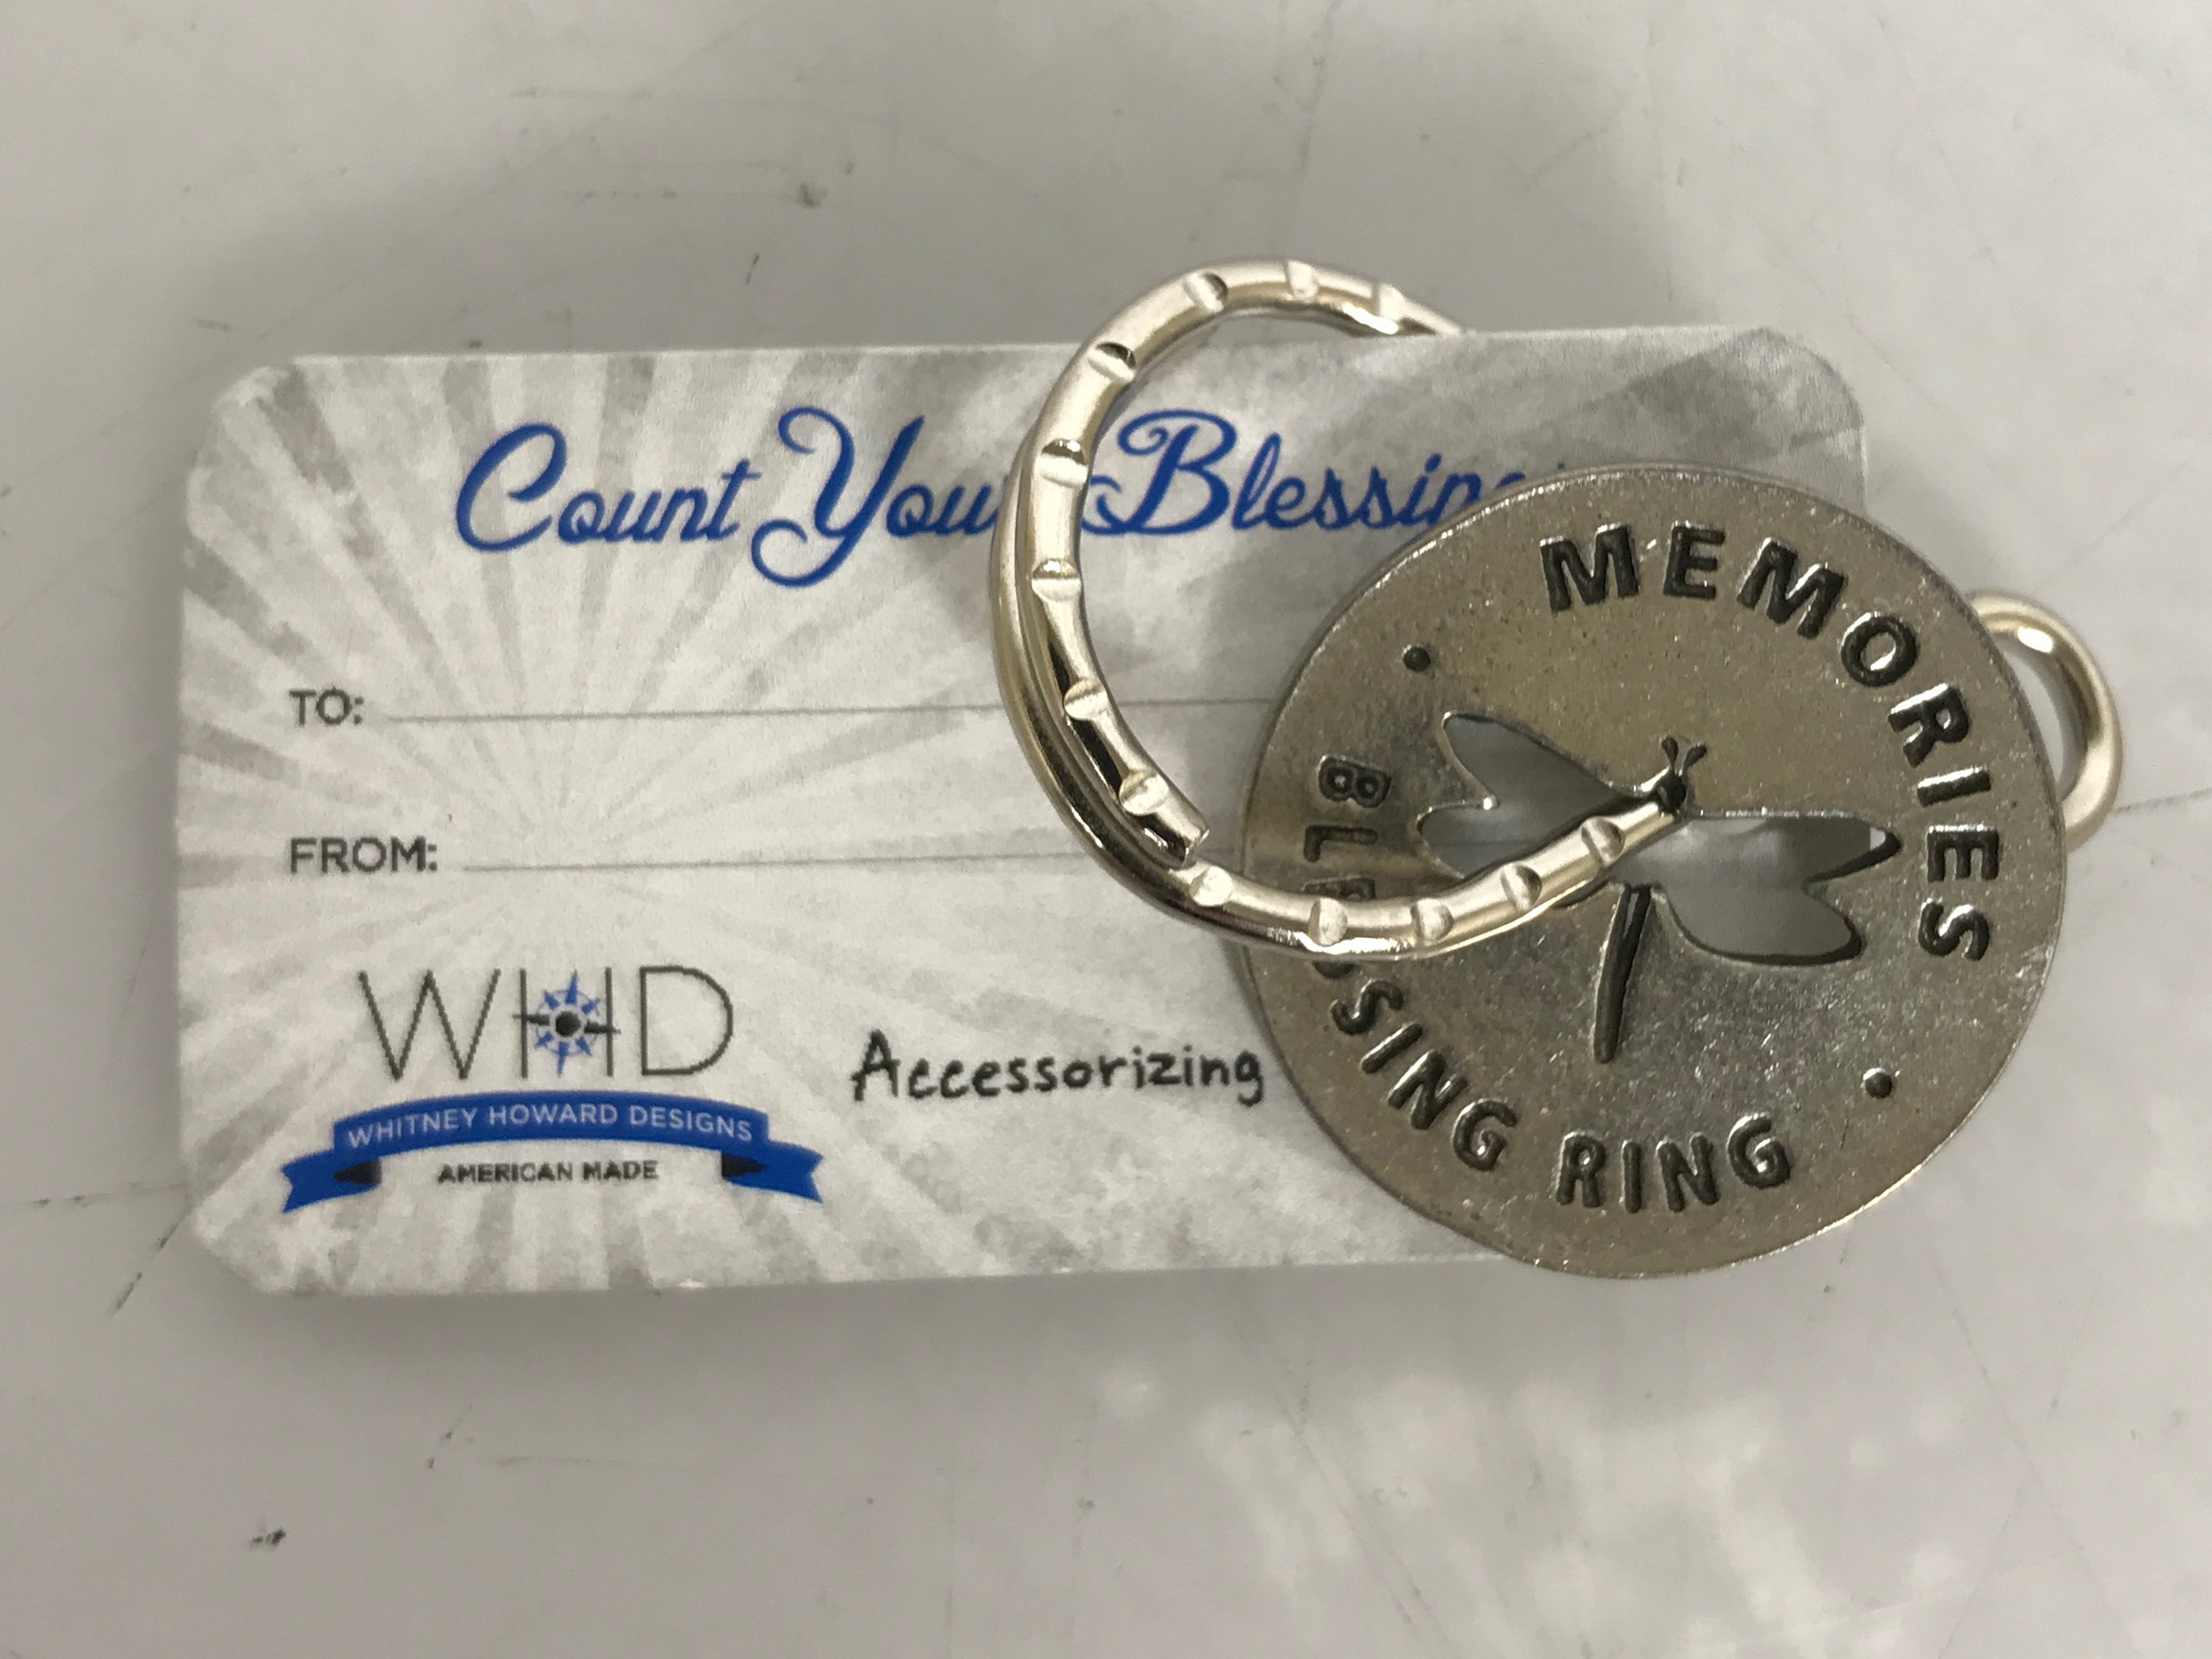 WHD BlessingRings "Memories" Keychain